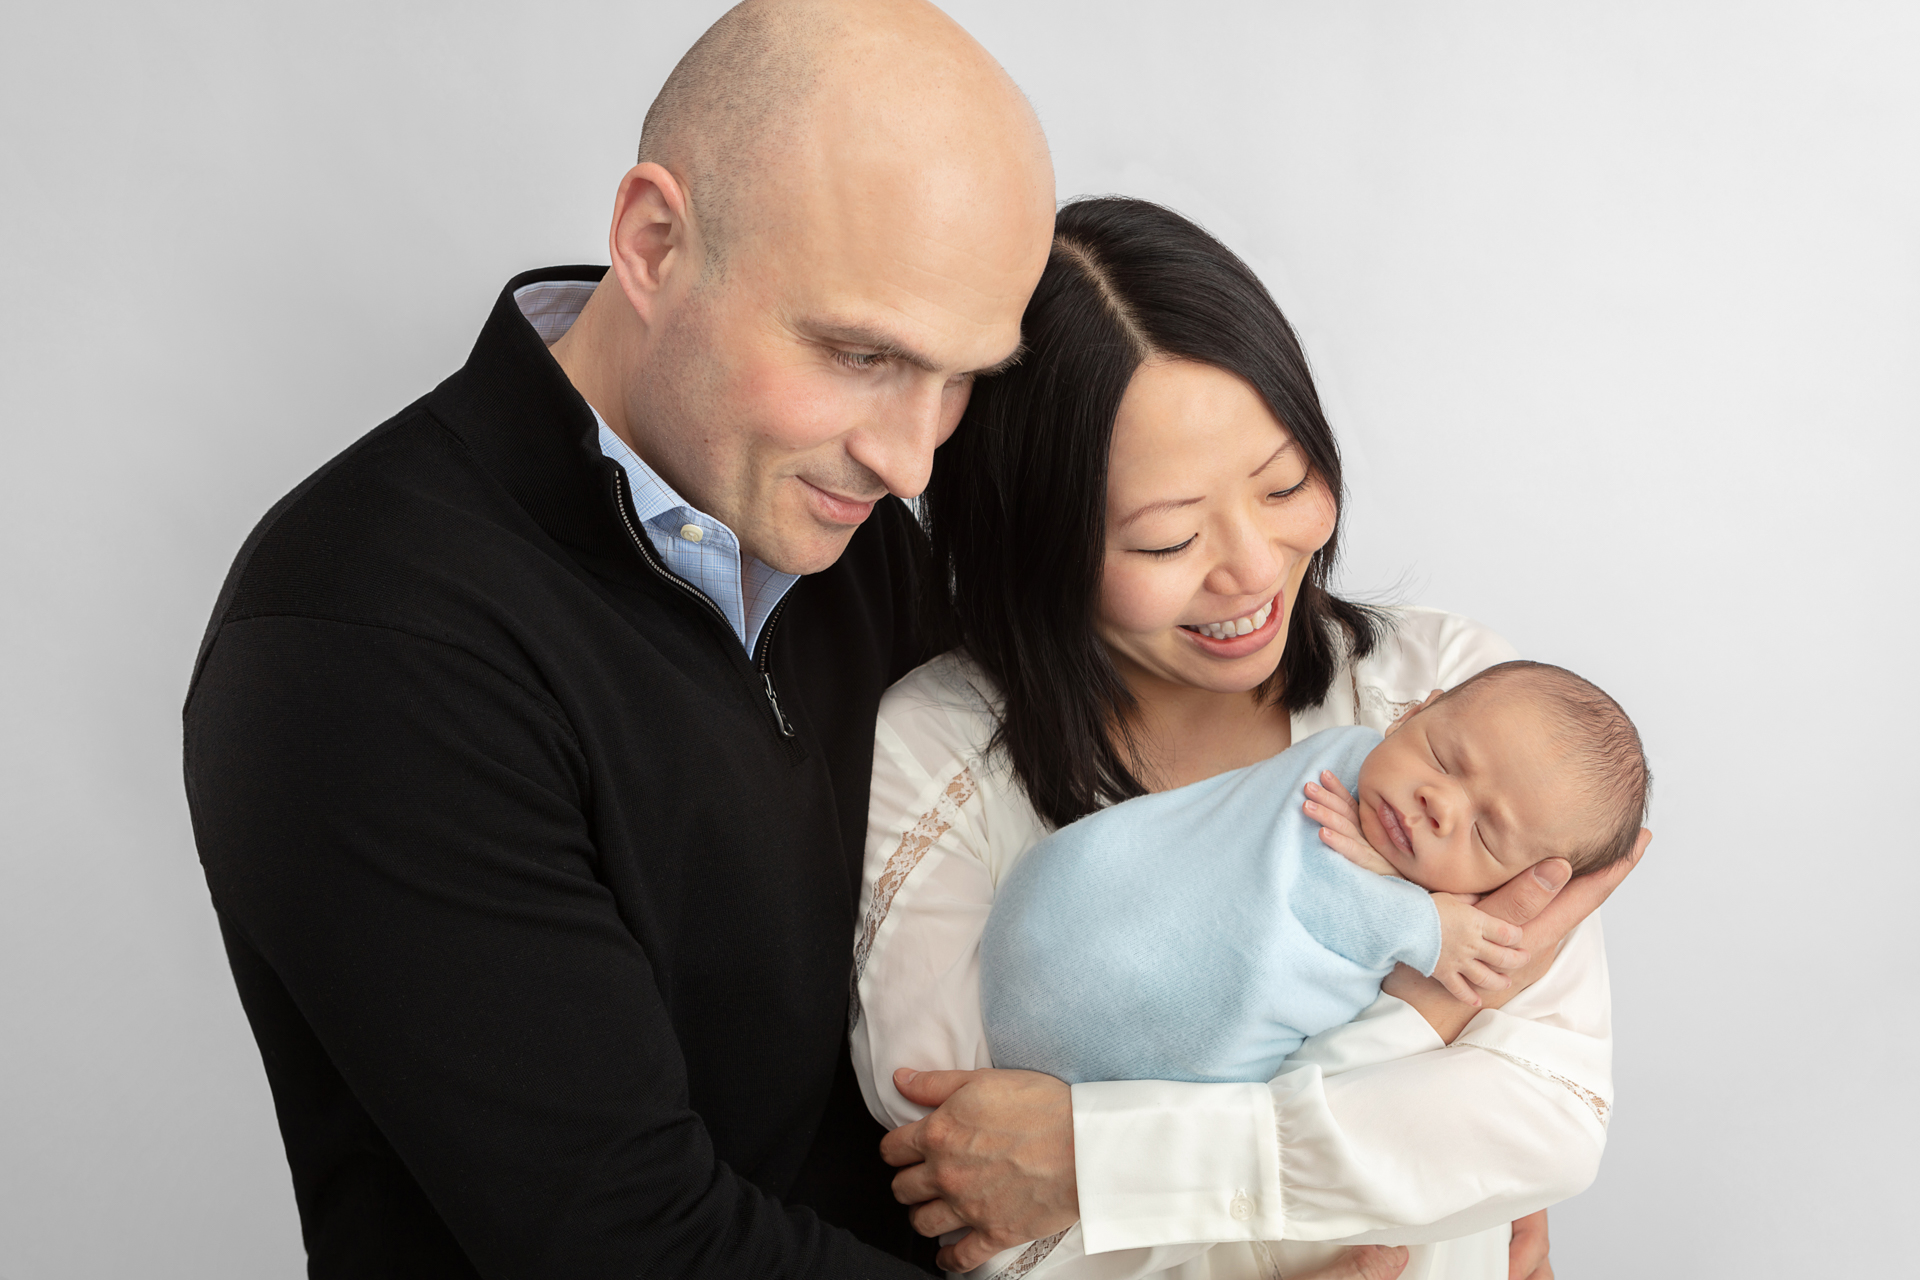 father, mother hold their newborn baby boy and look down lovingly at him; Karen Kahn